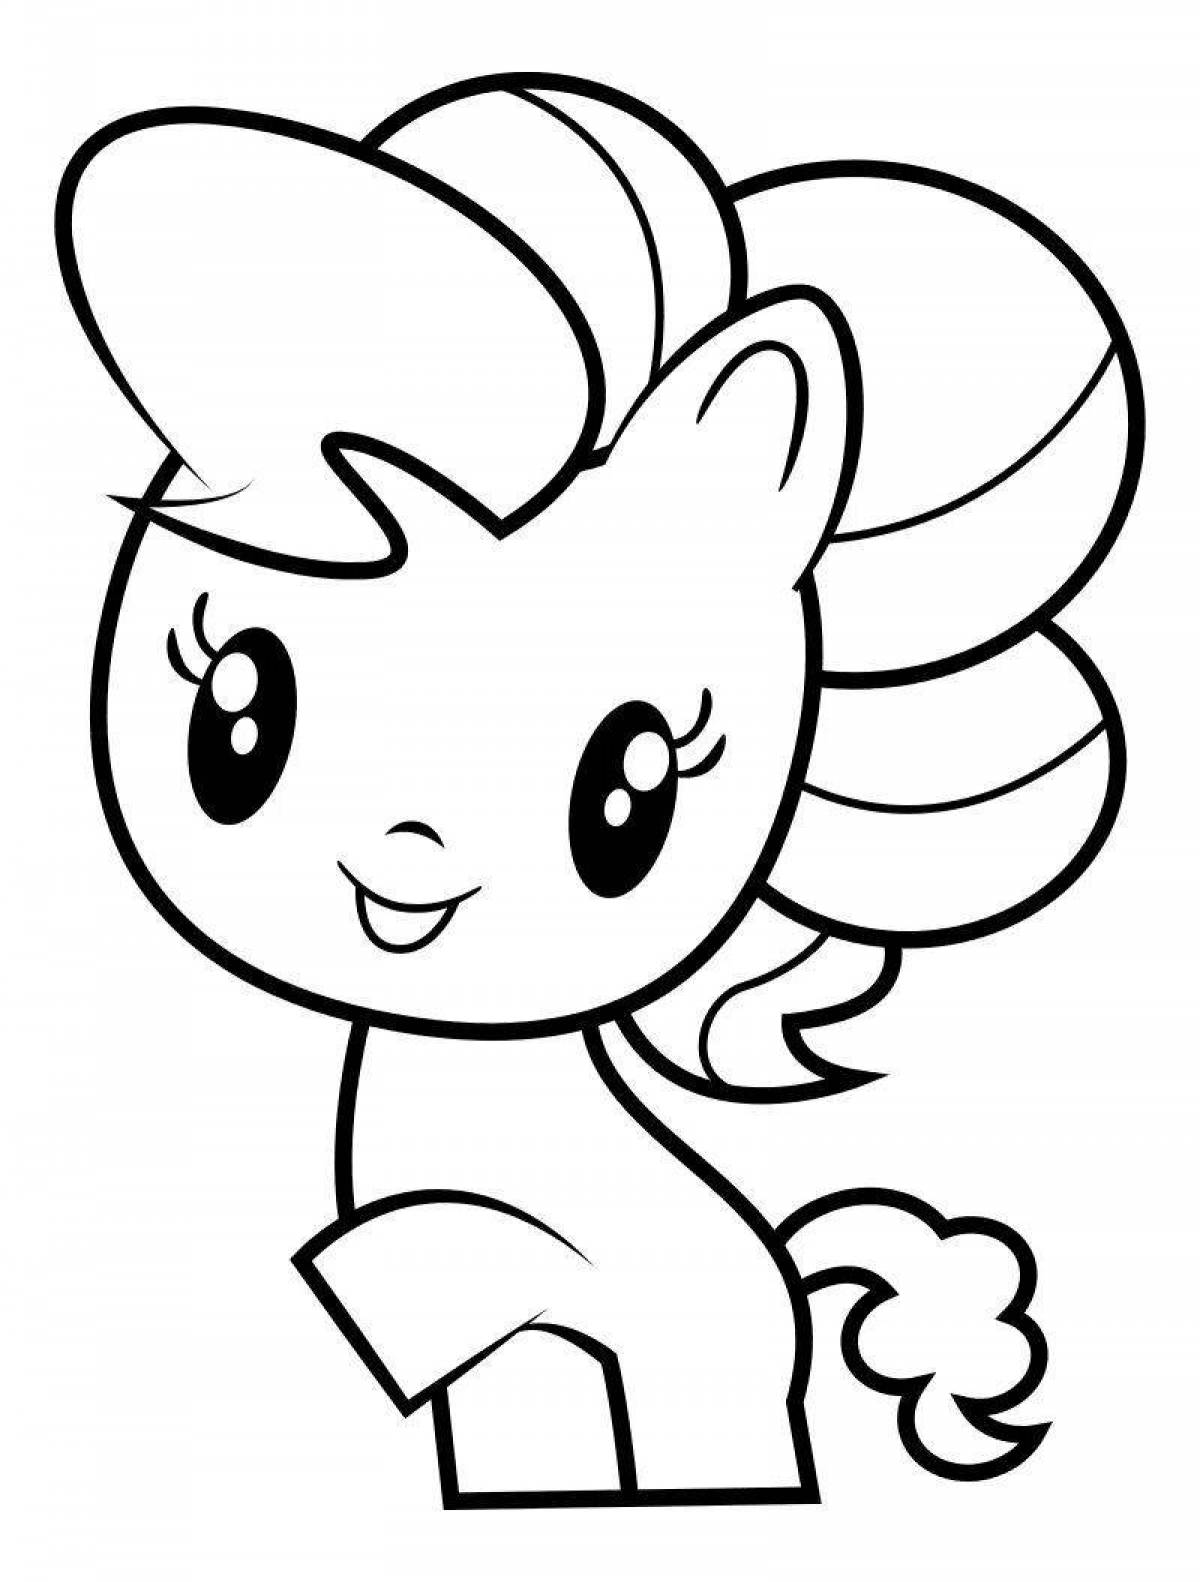 Coloring page funny mini pony